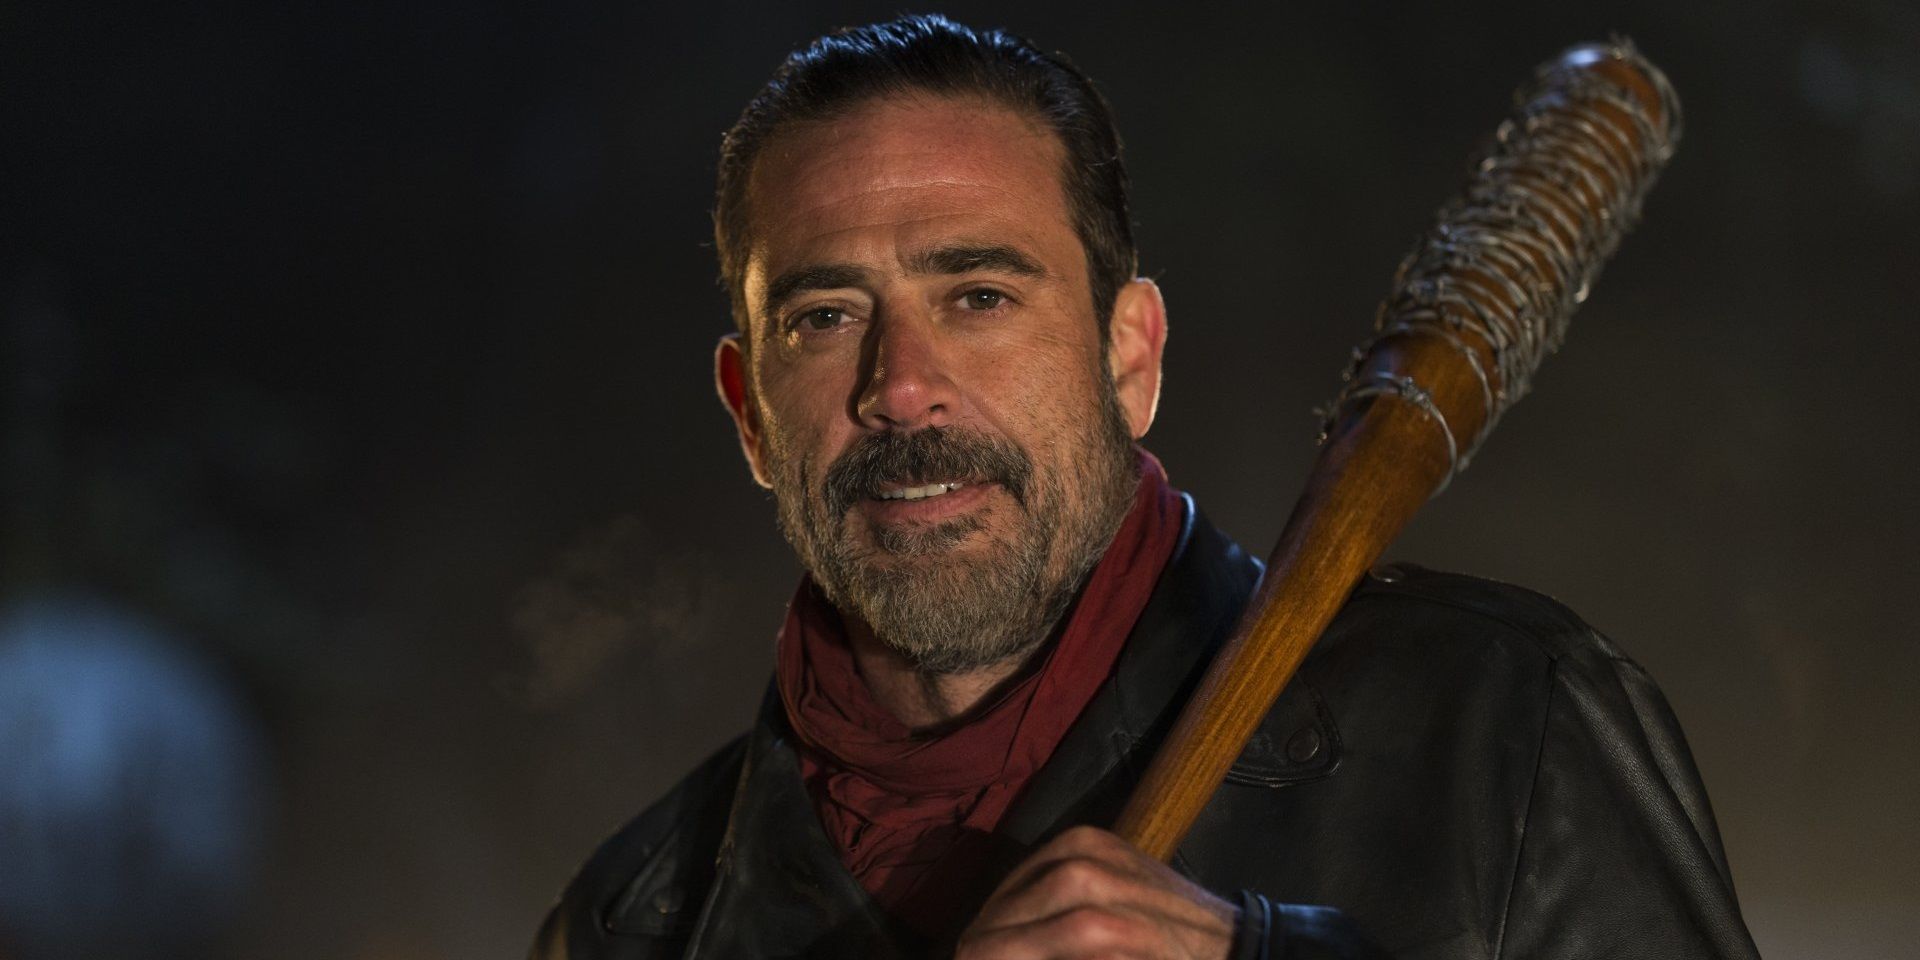 Negan Smiling While Holding a Bat in The Walking Dead